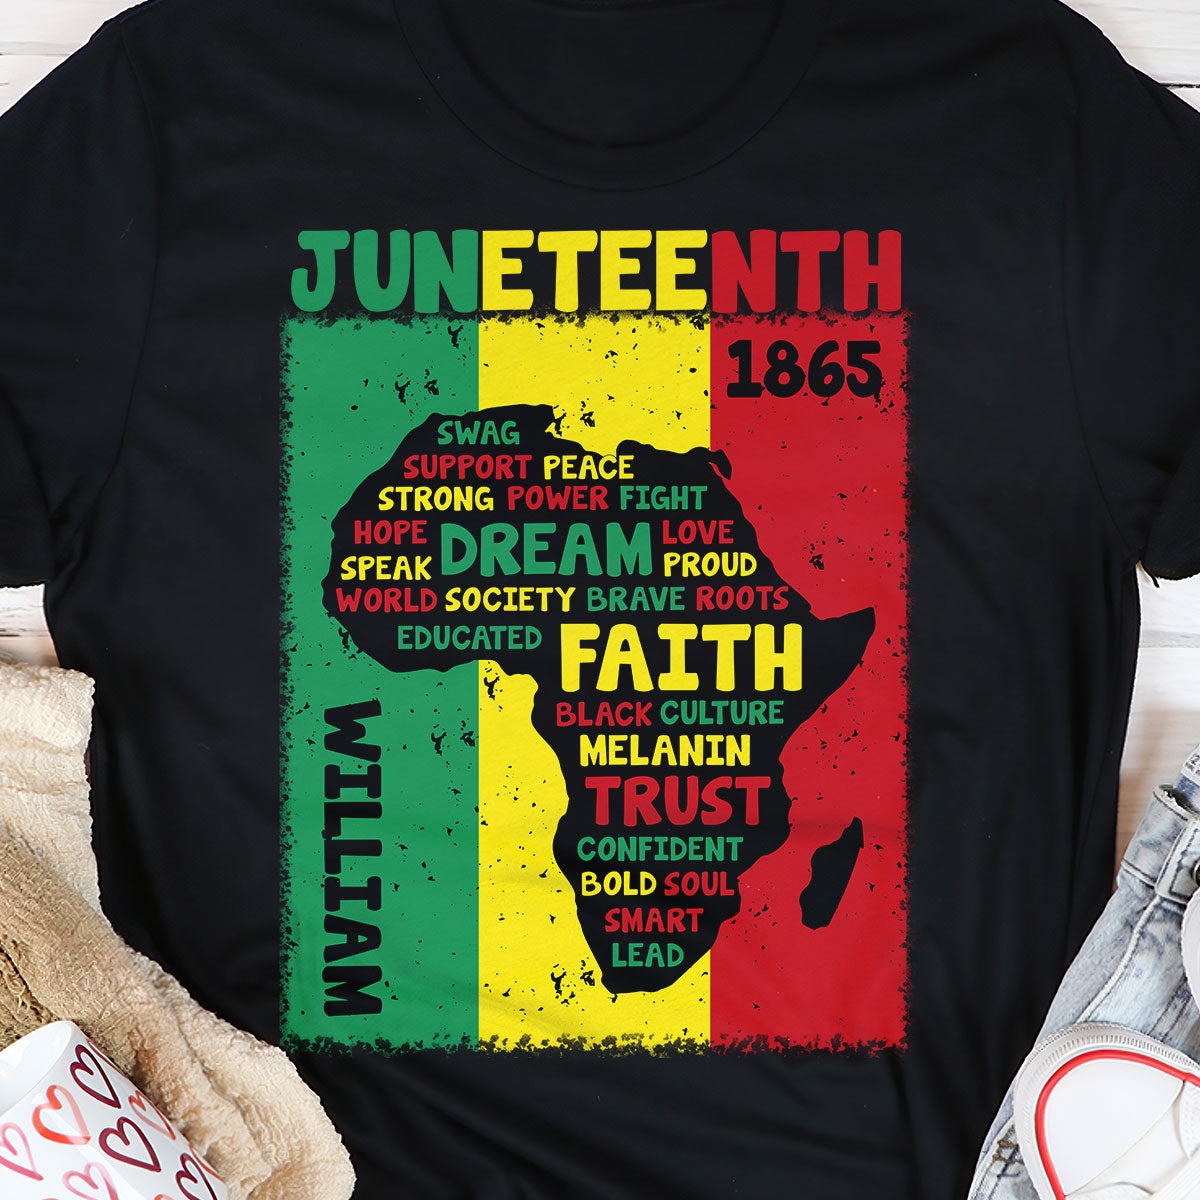 Juneteenth 1865 - Personalized Name - Tshirt TC2DTHN23